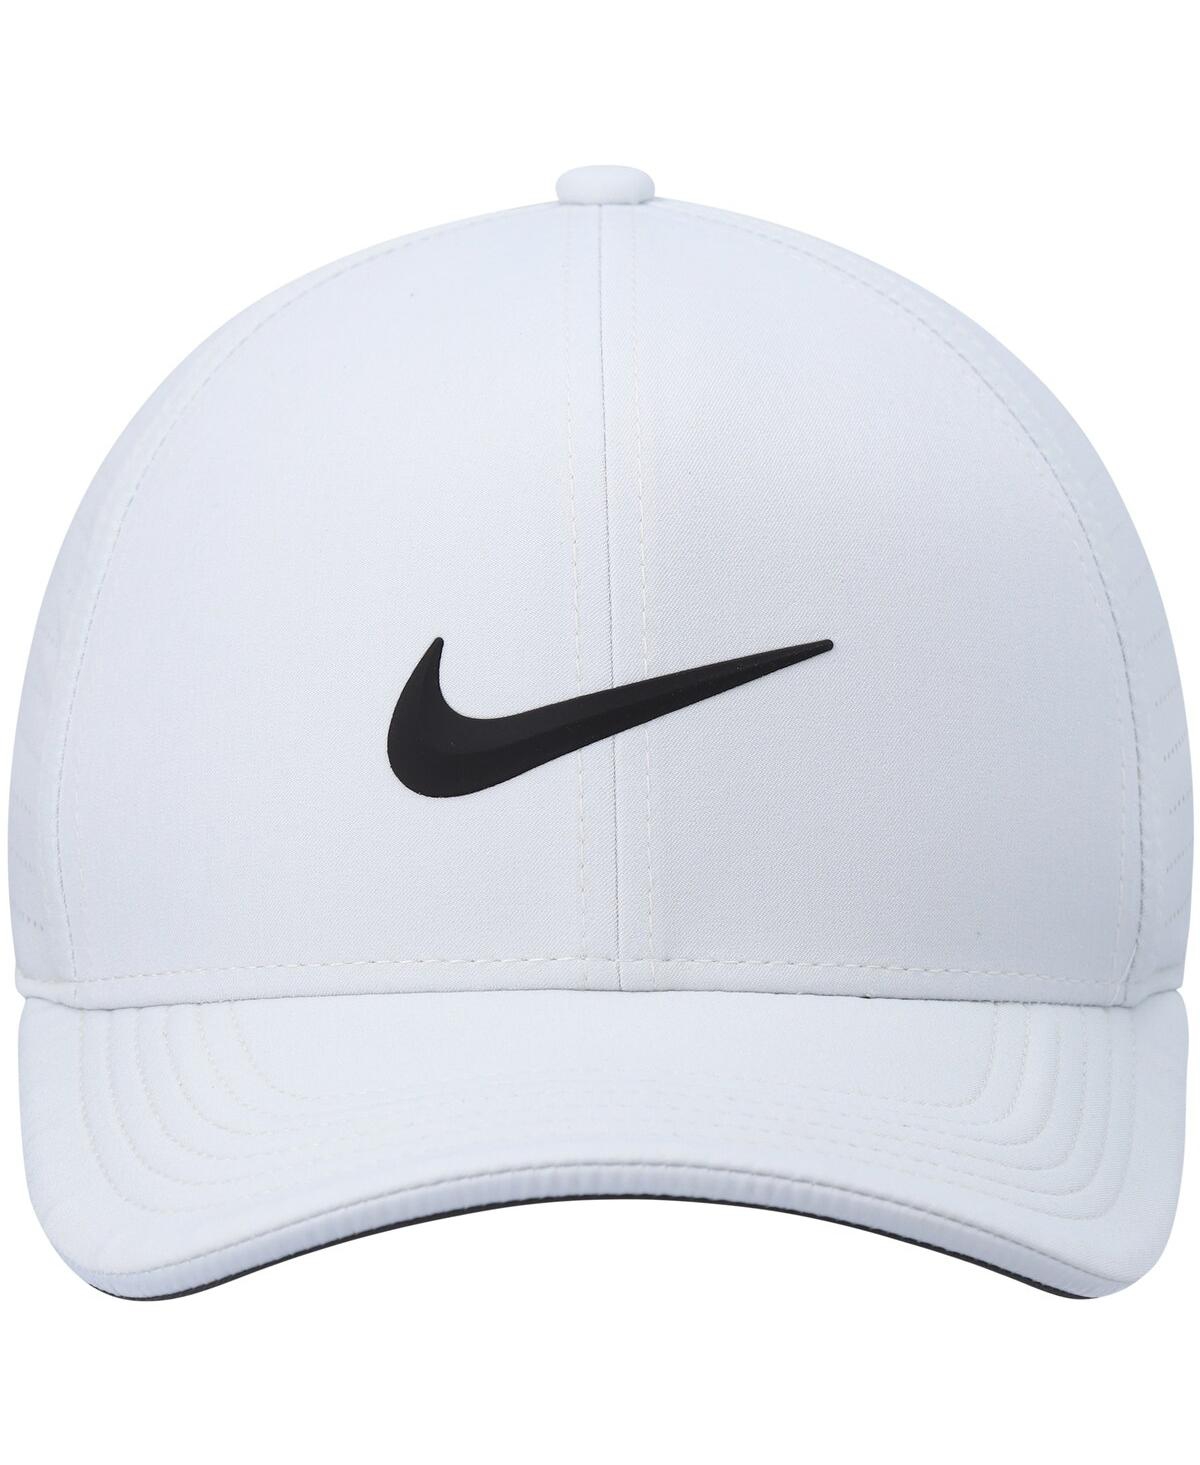 Shop Nike Men's  Golf Gray Aerobill Classic99 Performance Fitted Hat